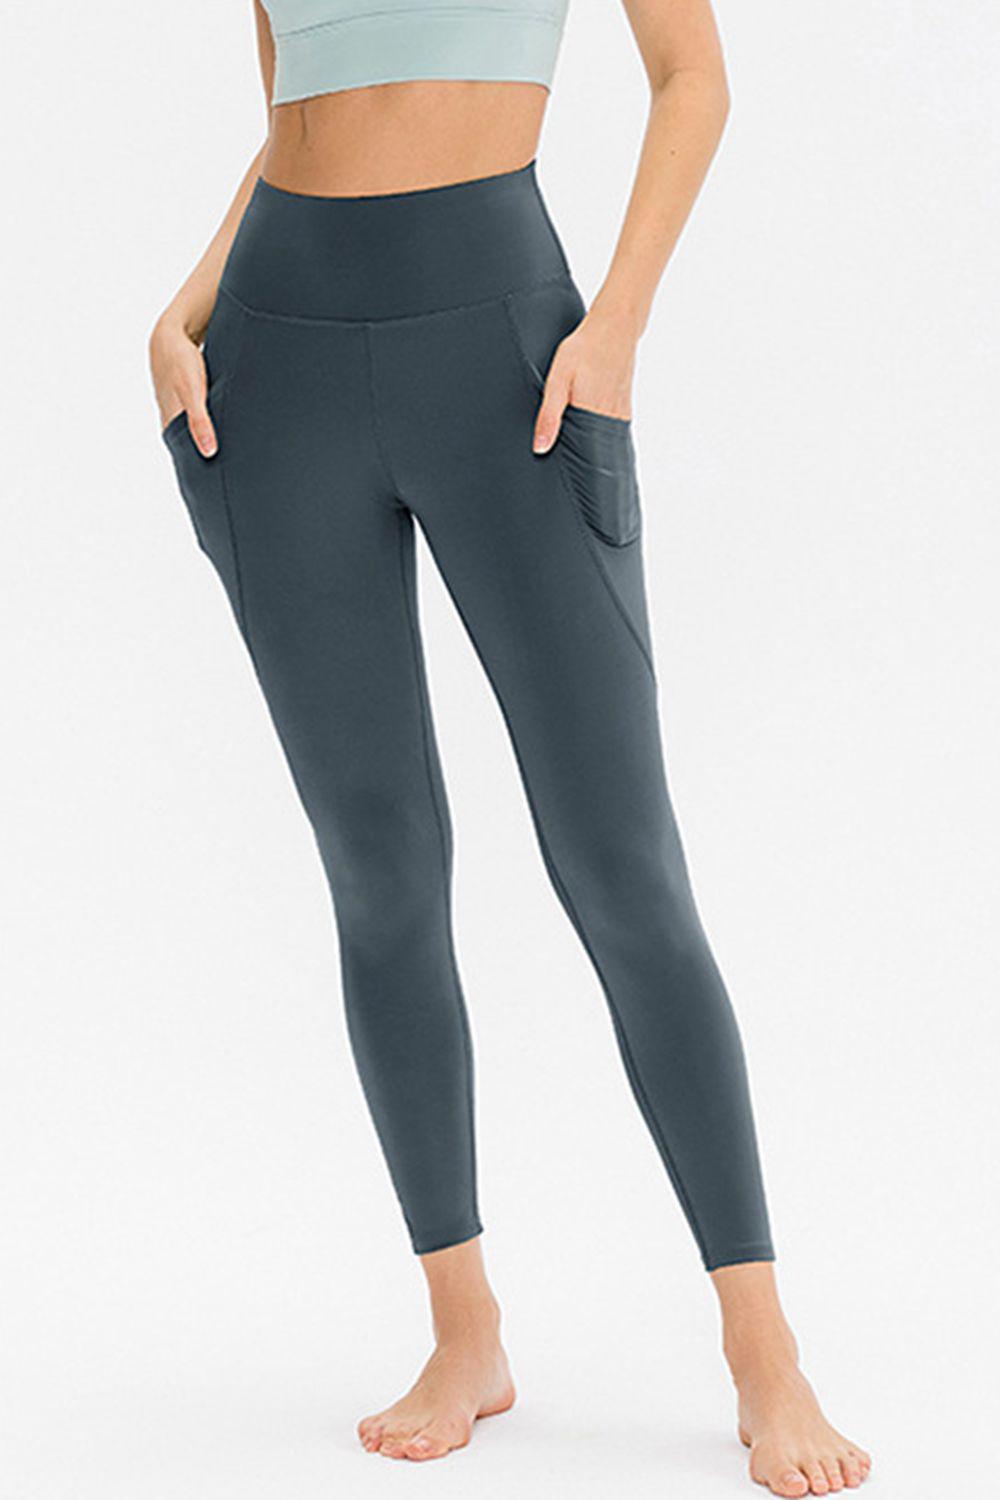 Slim Fit Long Active Leggings with Pockets BLUE ZONE PLANET